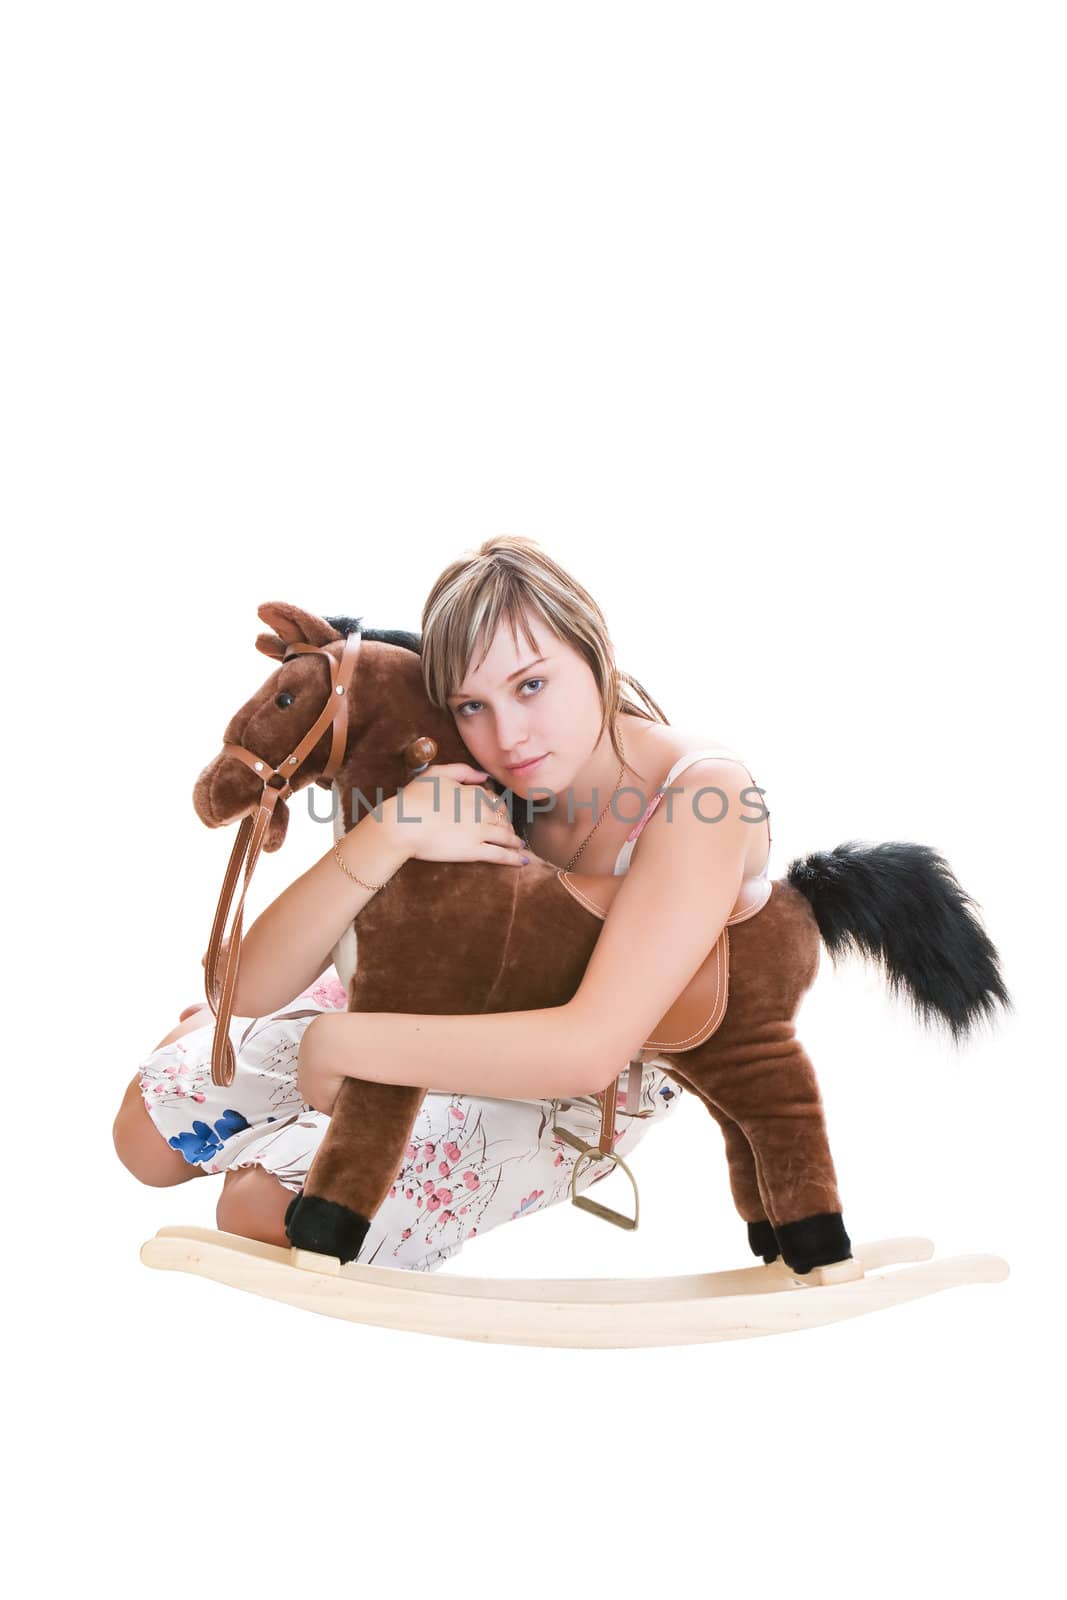 The girl embraces the toy horse